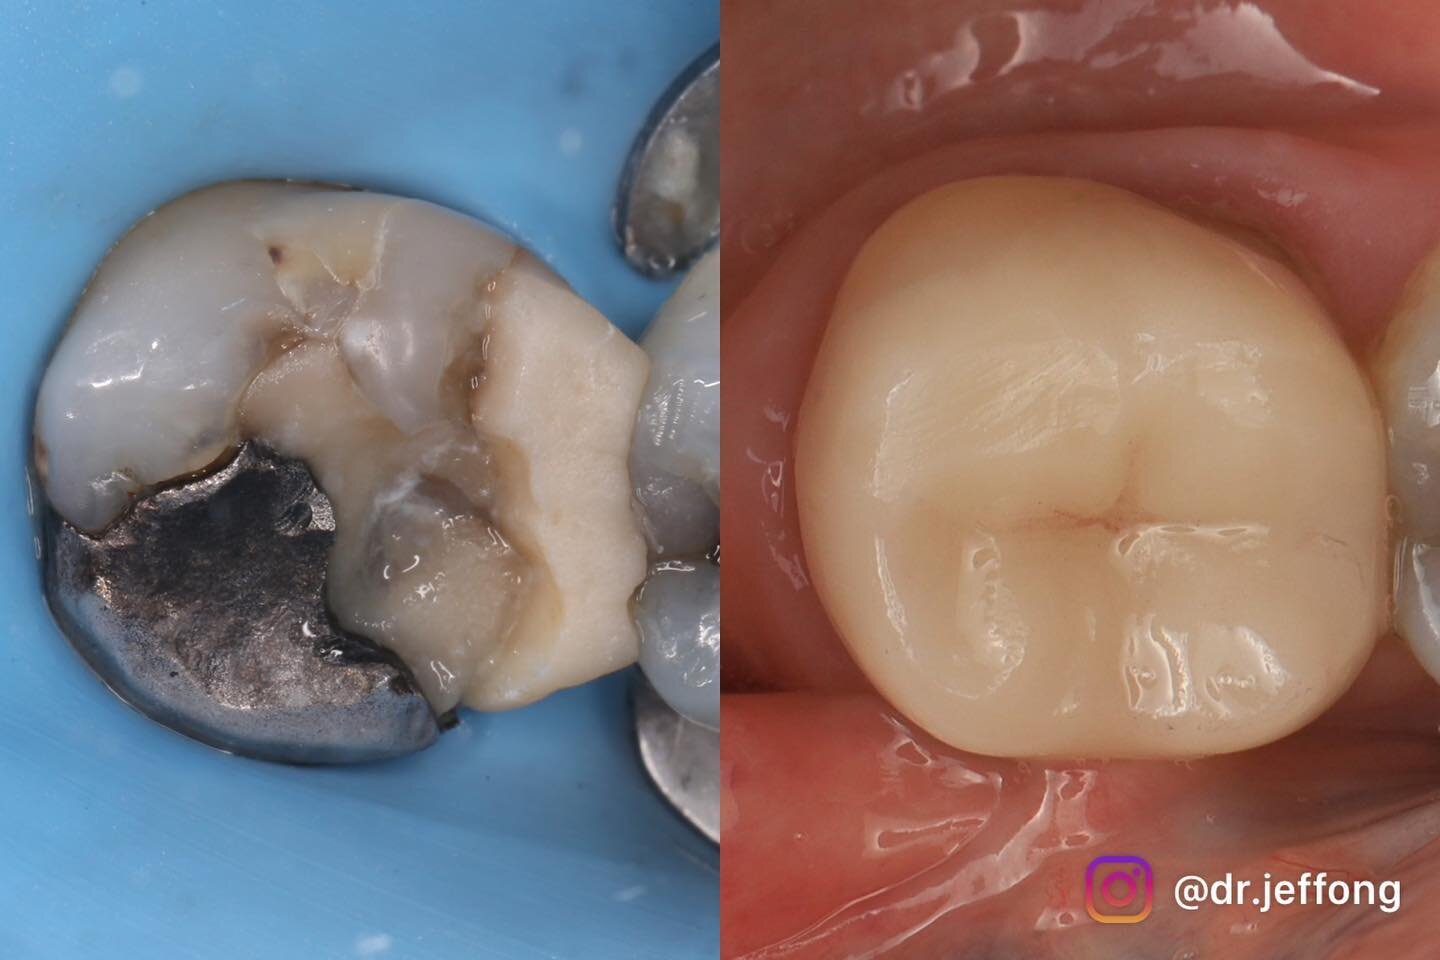 One-year review
Probably one of the most carious tooth I&rsquo;ve restored last year and was getting really close to the pulp. 

Always follow a routine:
1) Accurate diagnosis- symptoms, tests and radiograph 
2) Avoid pulp exposure even if it means l